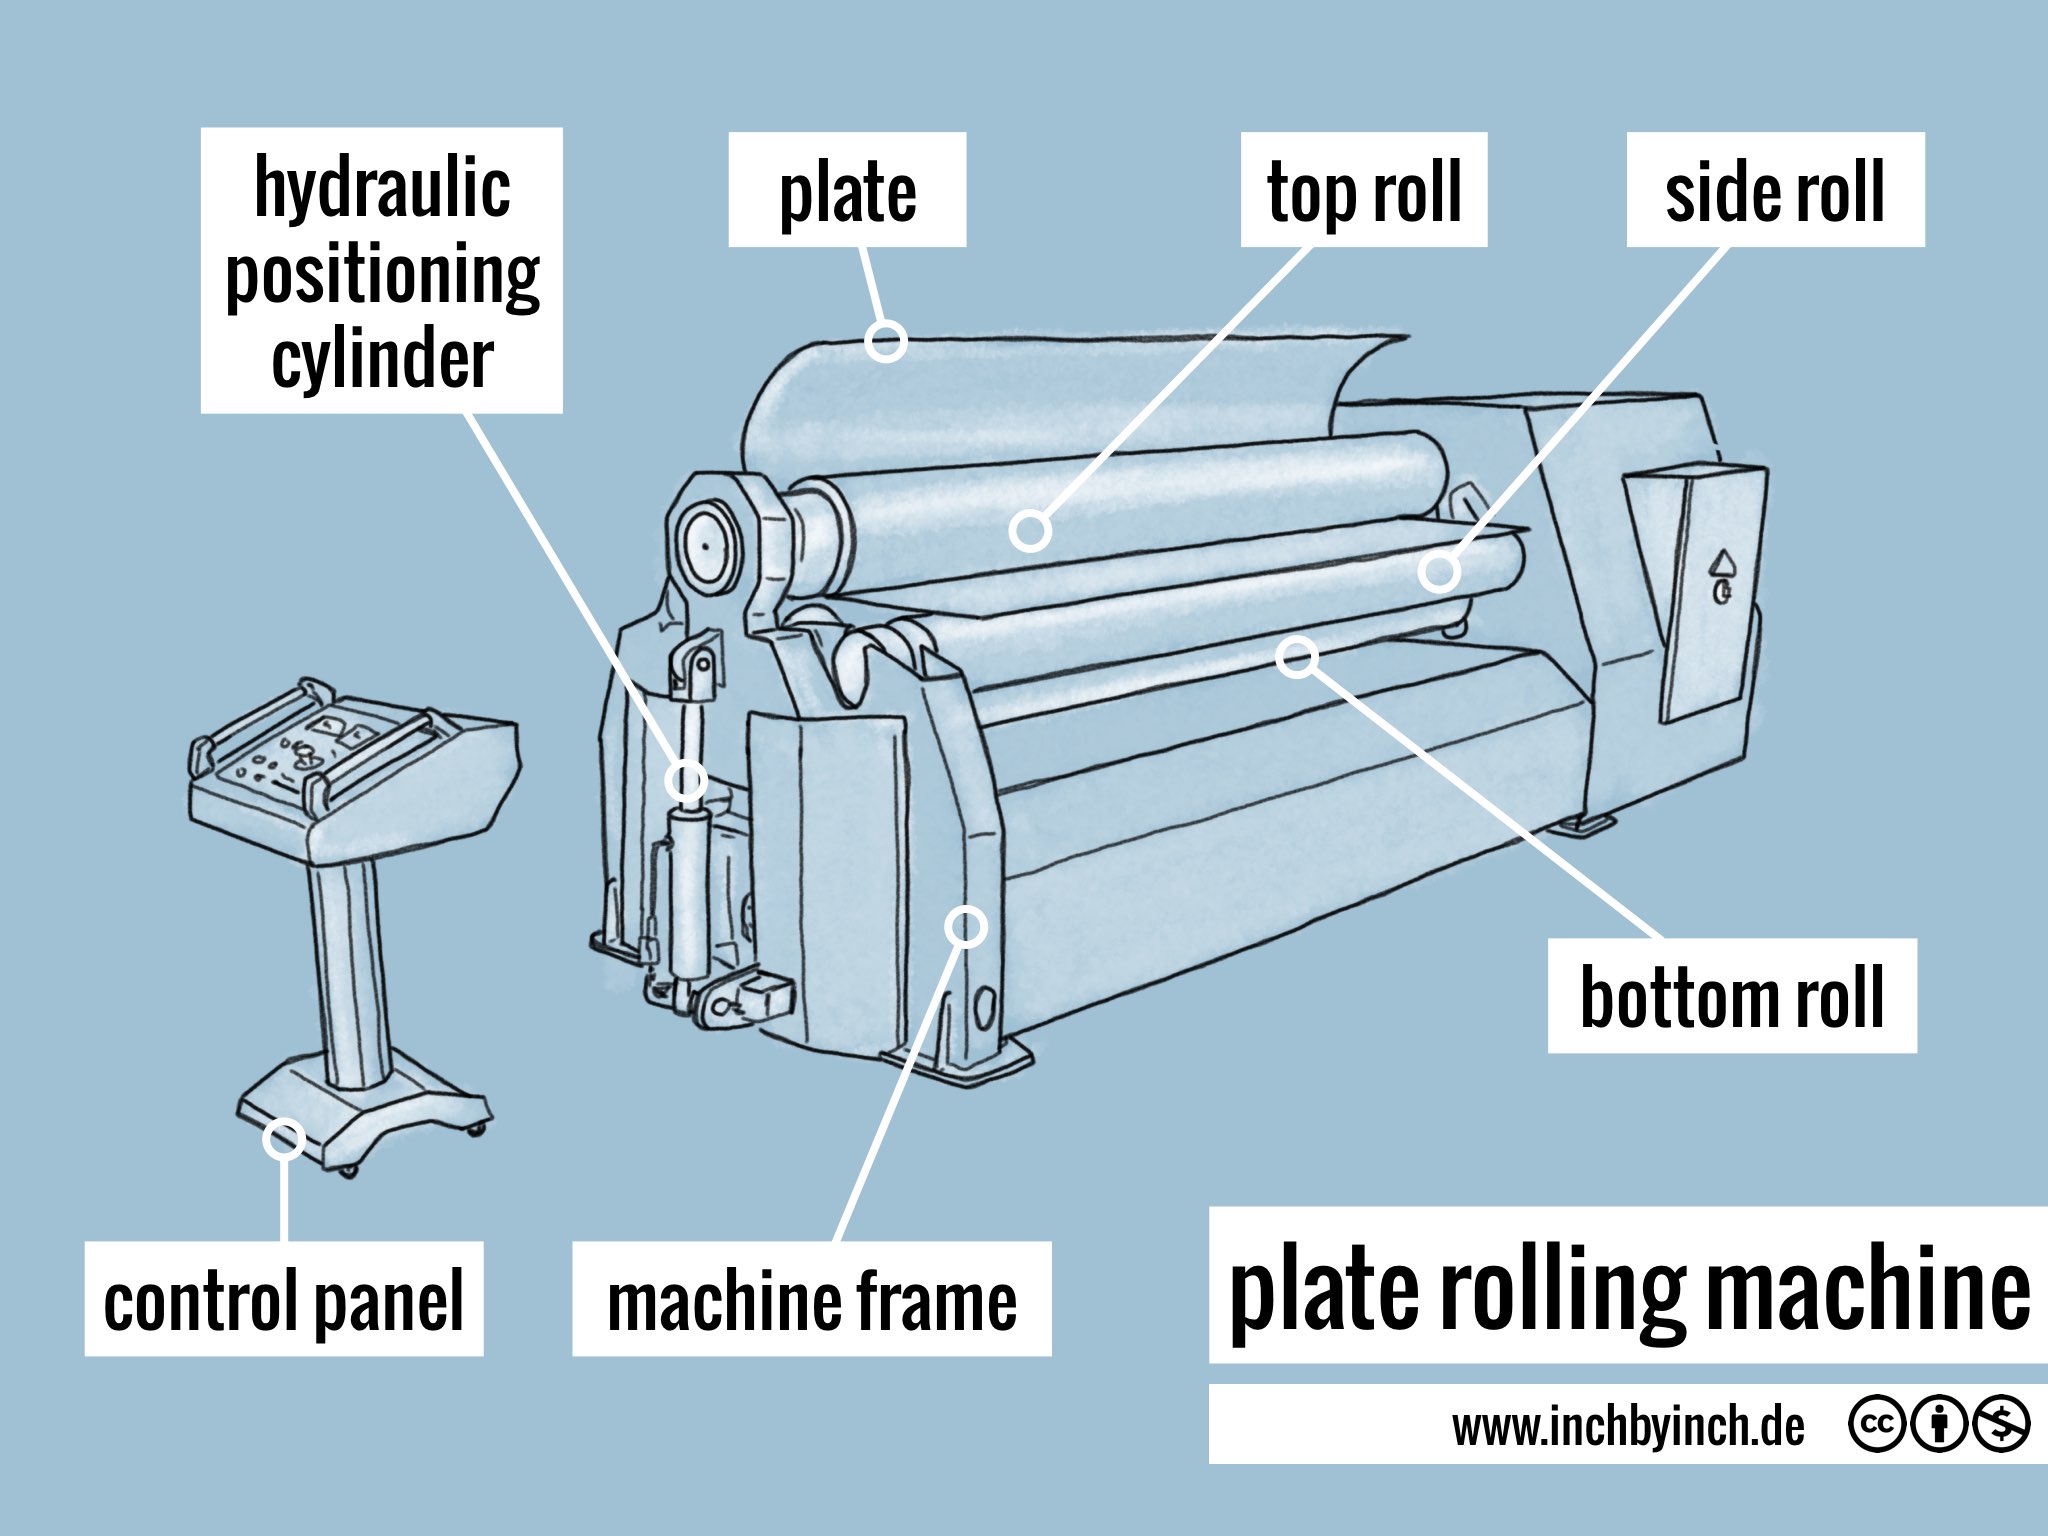 What Are the Vulnerable Parts of the Sheet metal rolls and How to protect them?